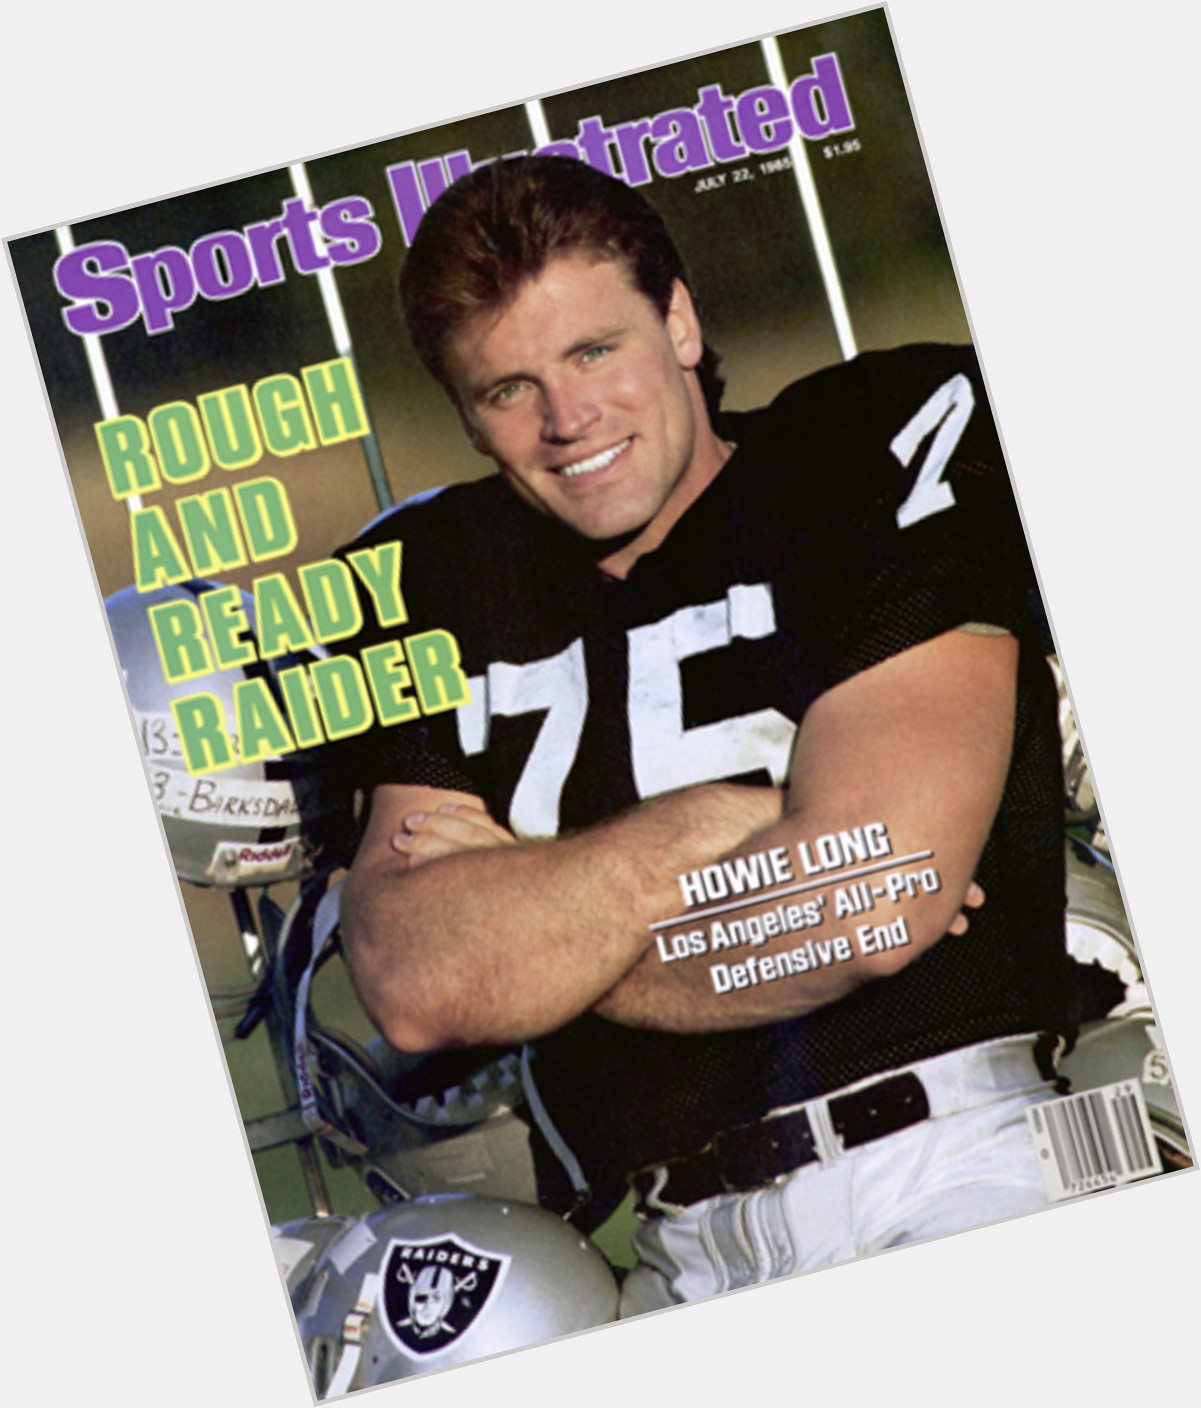 Happy Birthday to Howie Long! 